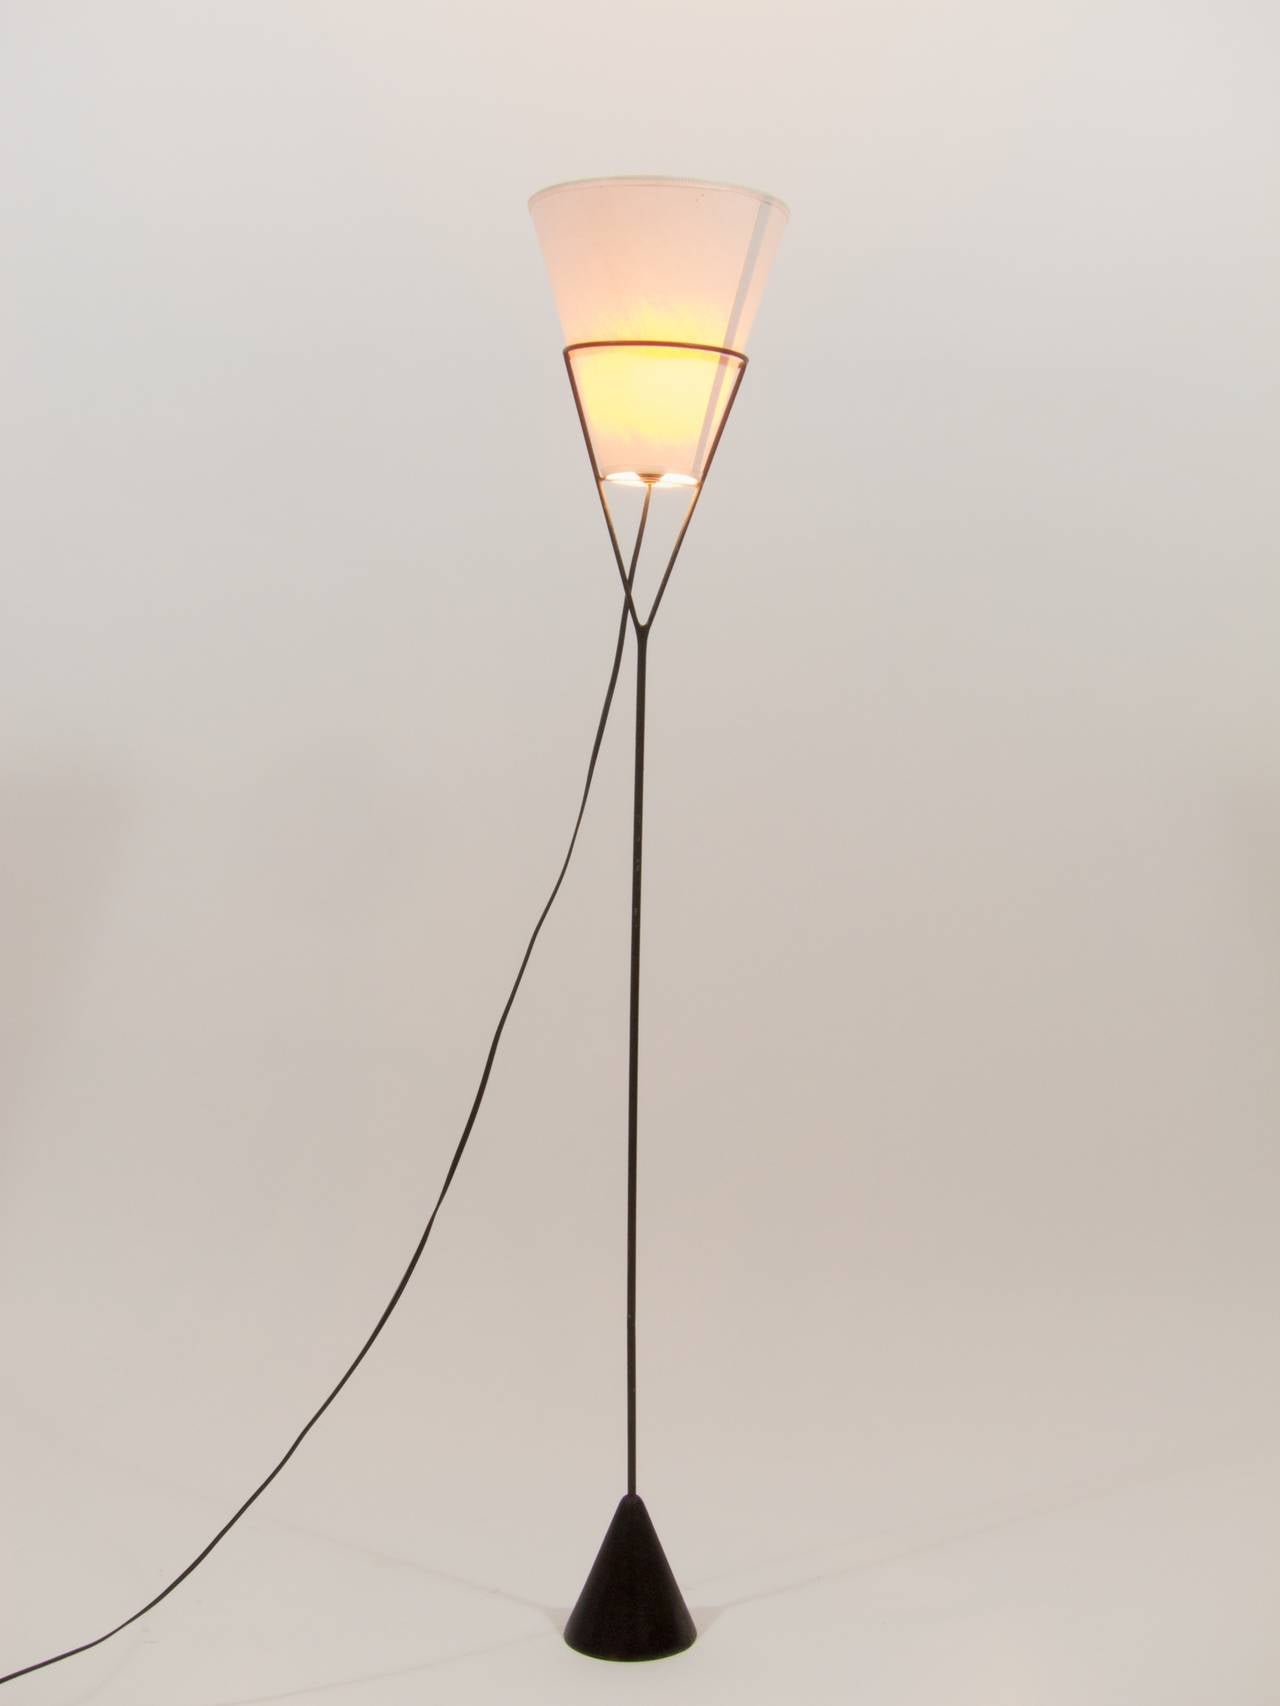 Vintage Floor or torch lamp (torchère).
"Umkehrlampe" 1950s, designed by Carl Auböck.
Black painted cast iron and steel rods, paper shade.